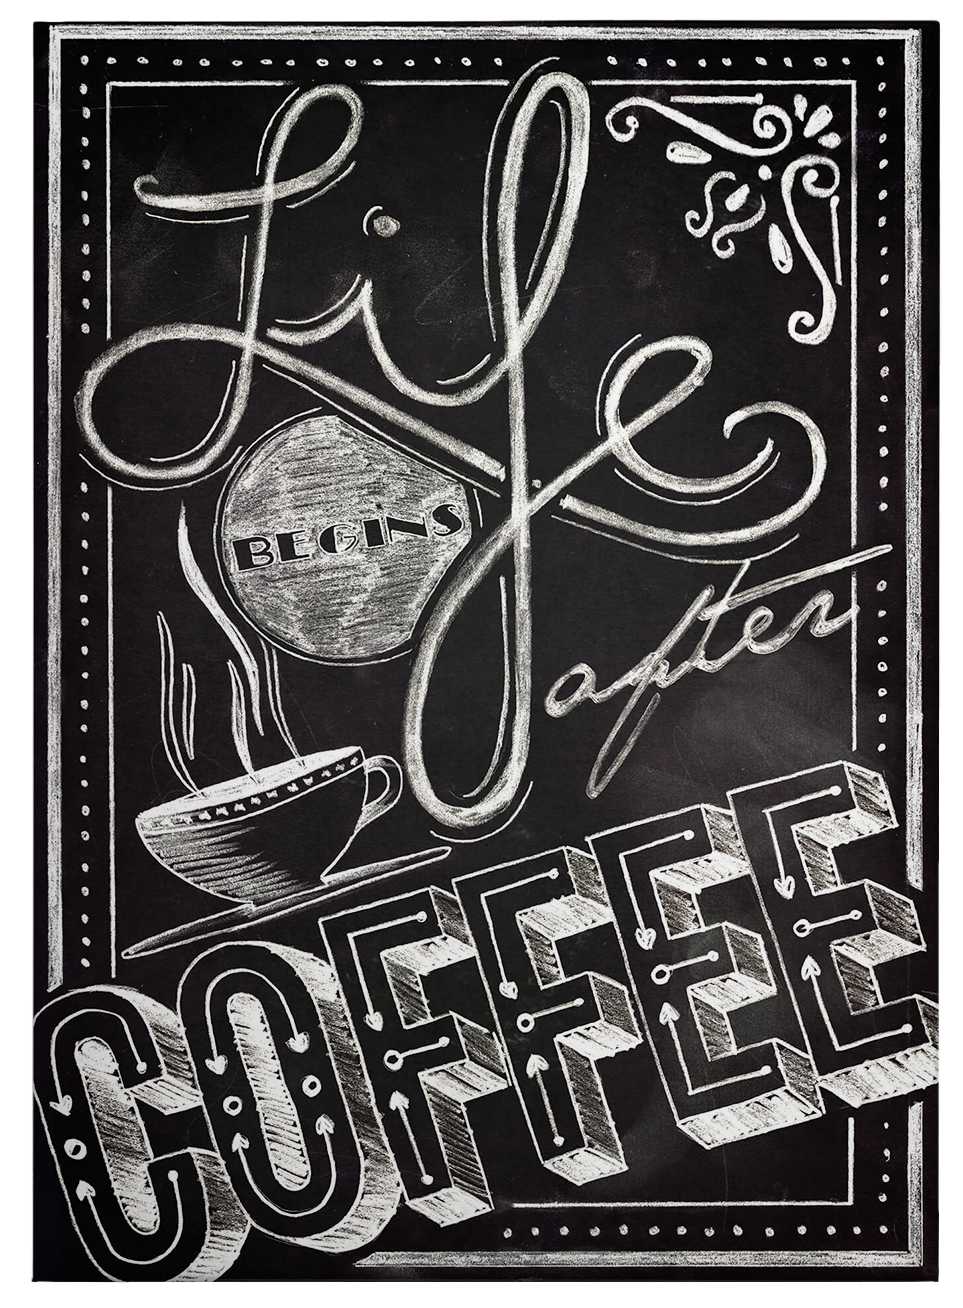             Canvas print coffeeshop sign, black and white
        